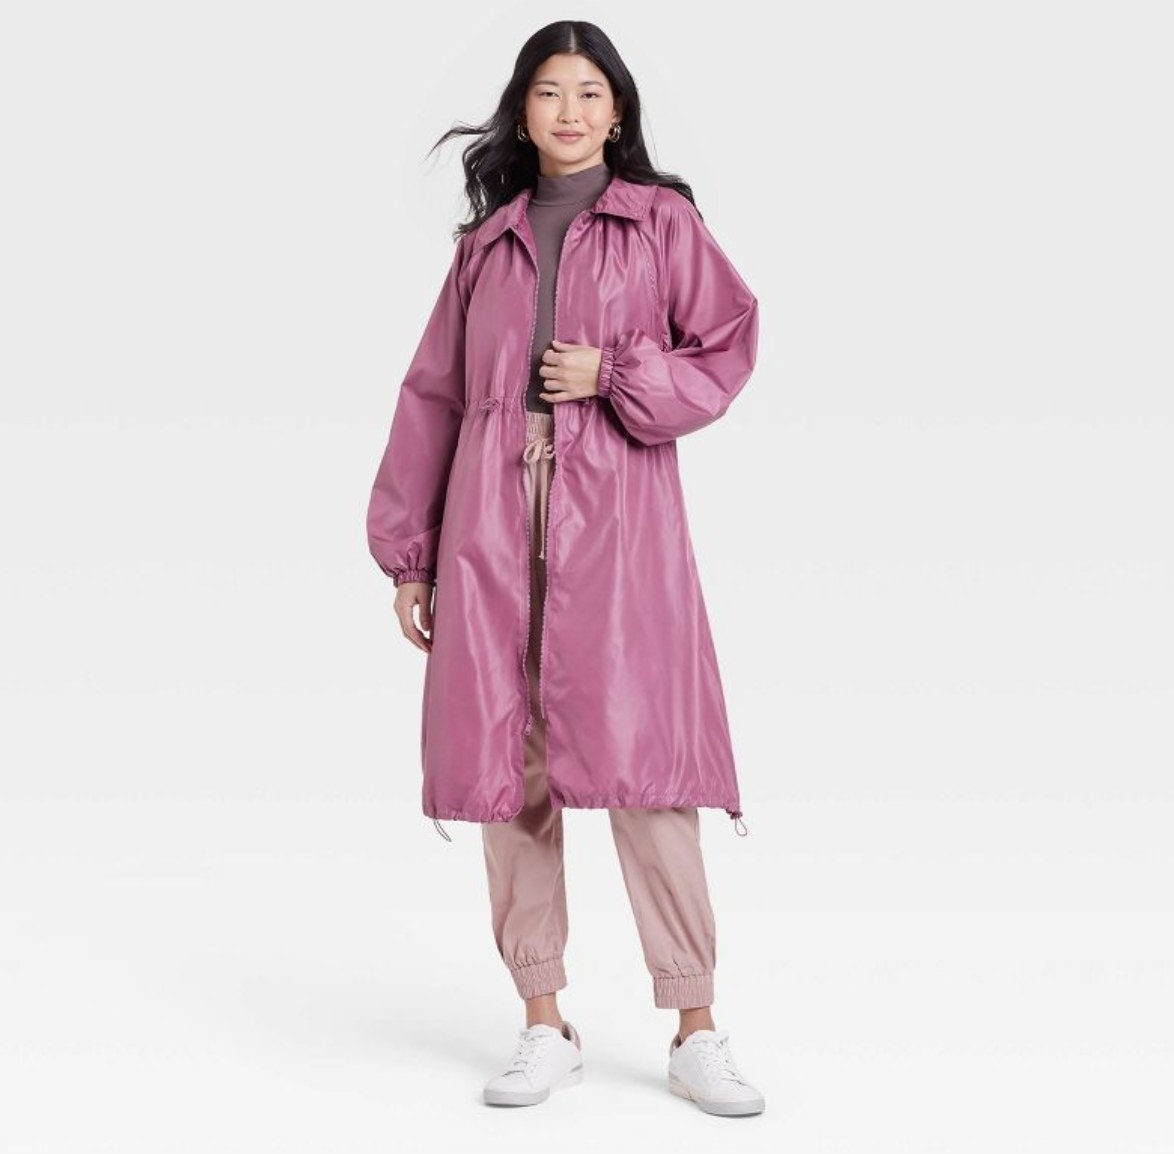 a model wearing the pink coat